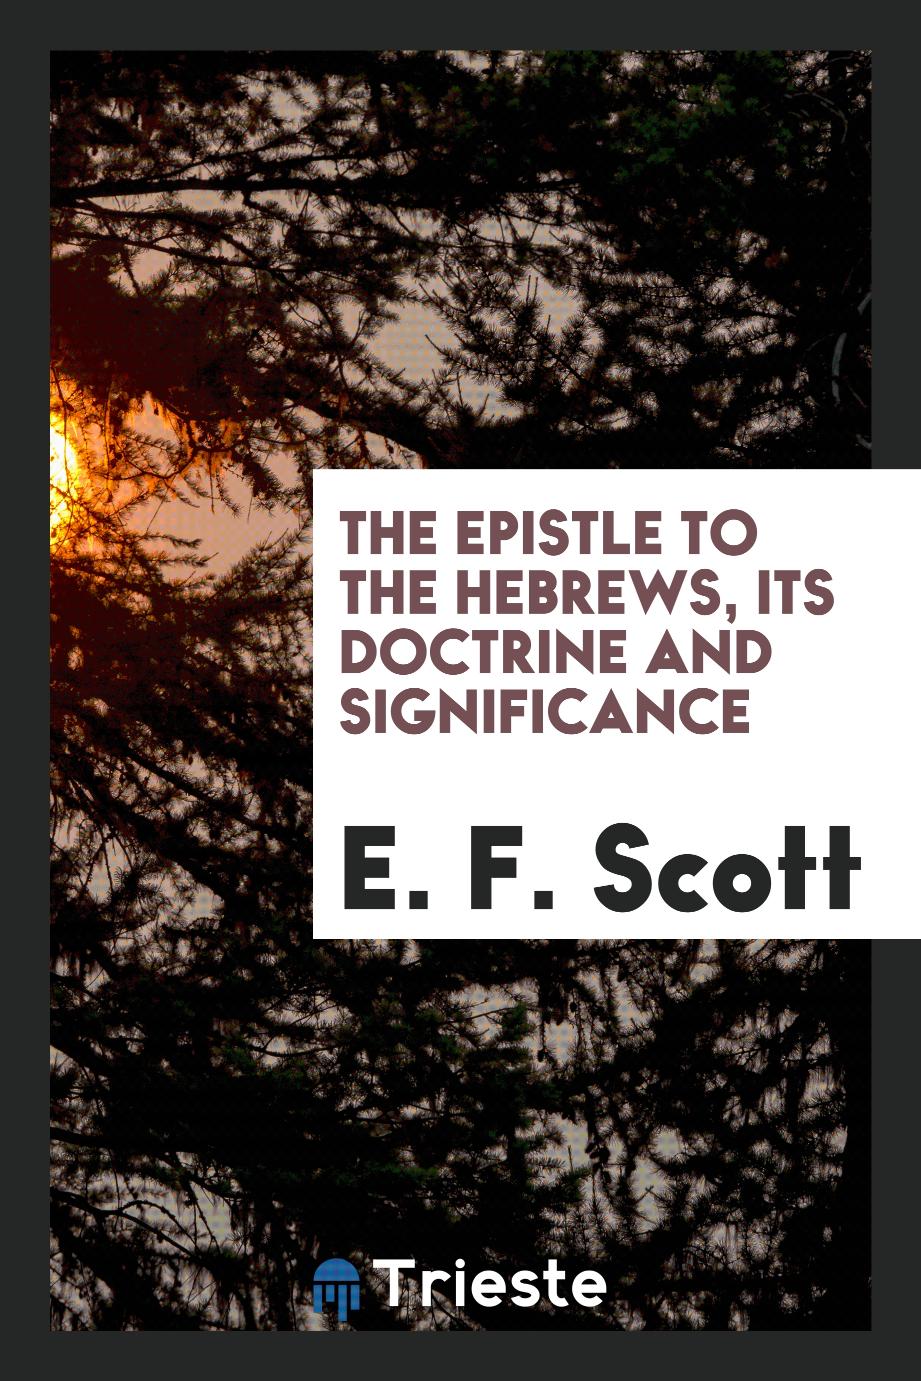 E. F. Scott - The Epistle to the Hebrews, Its Doctrine and Significance